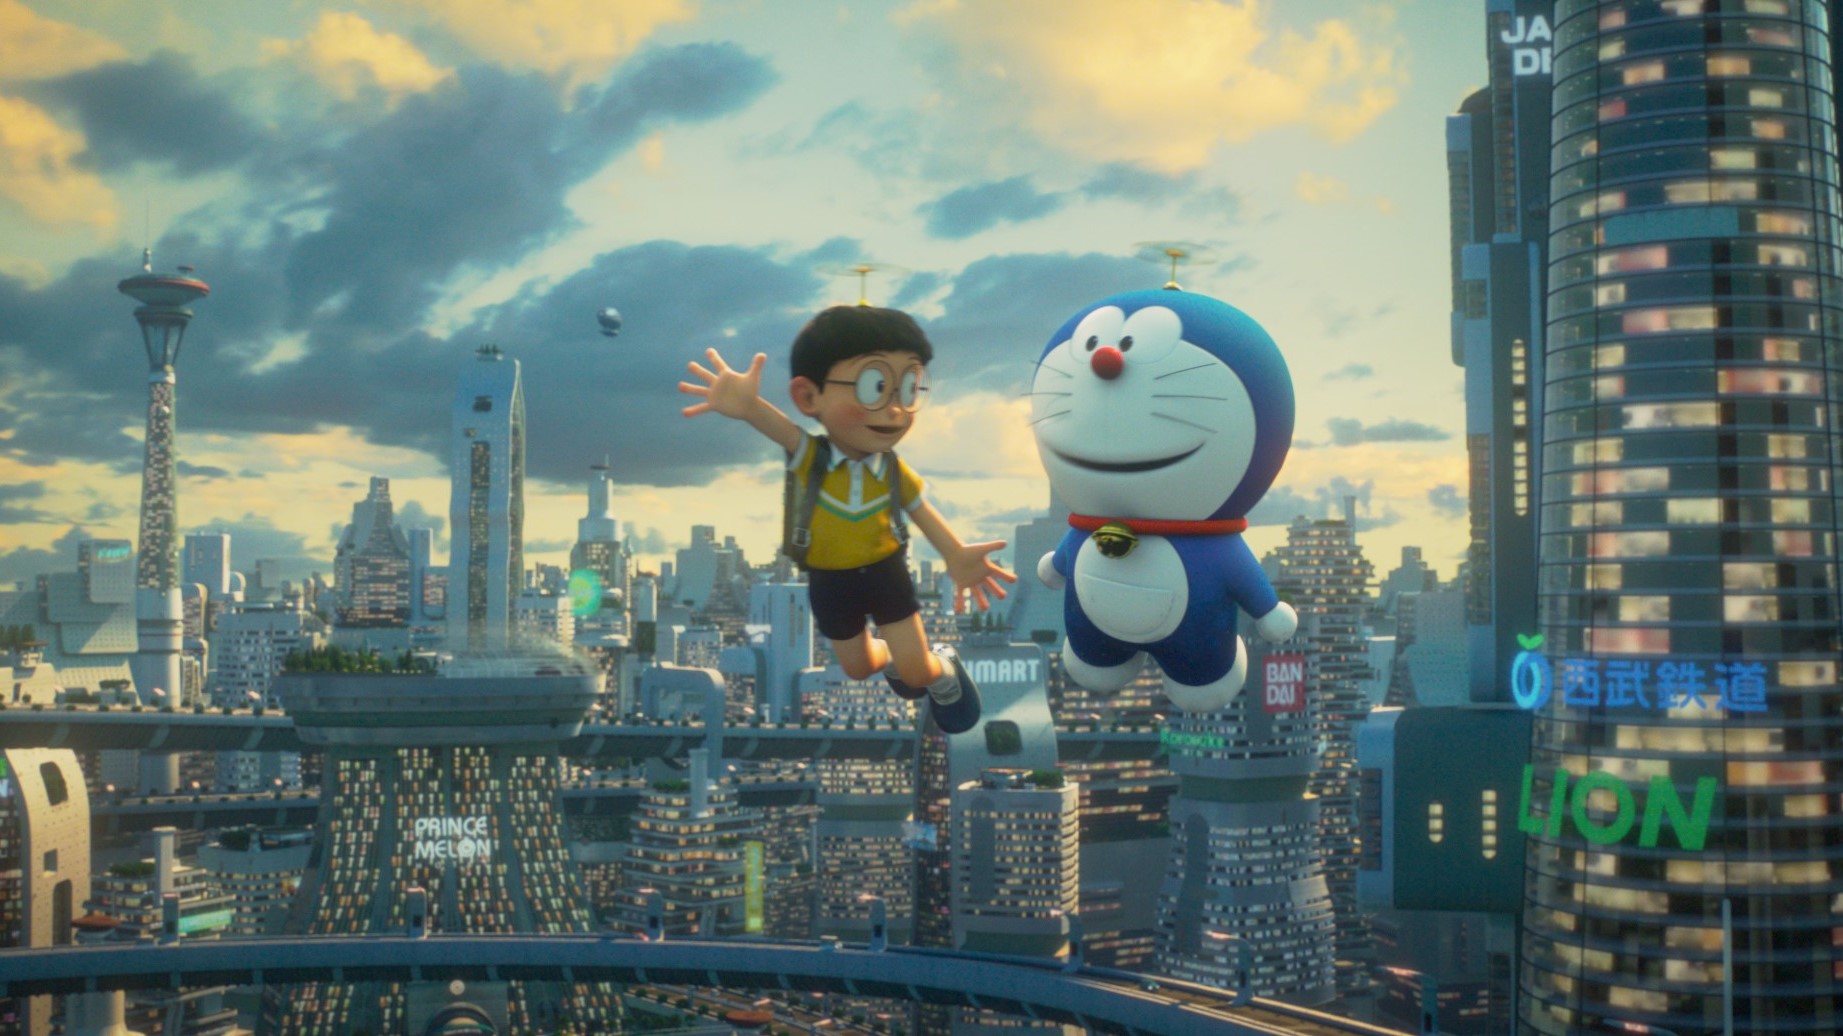 STAND BY ME Doraemon 2